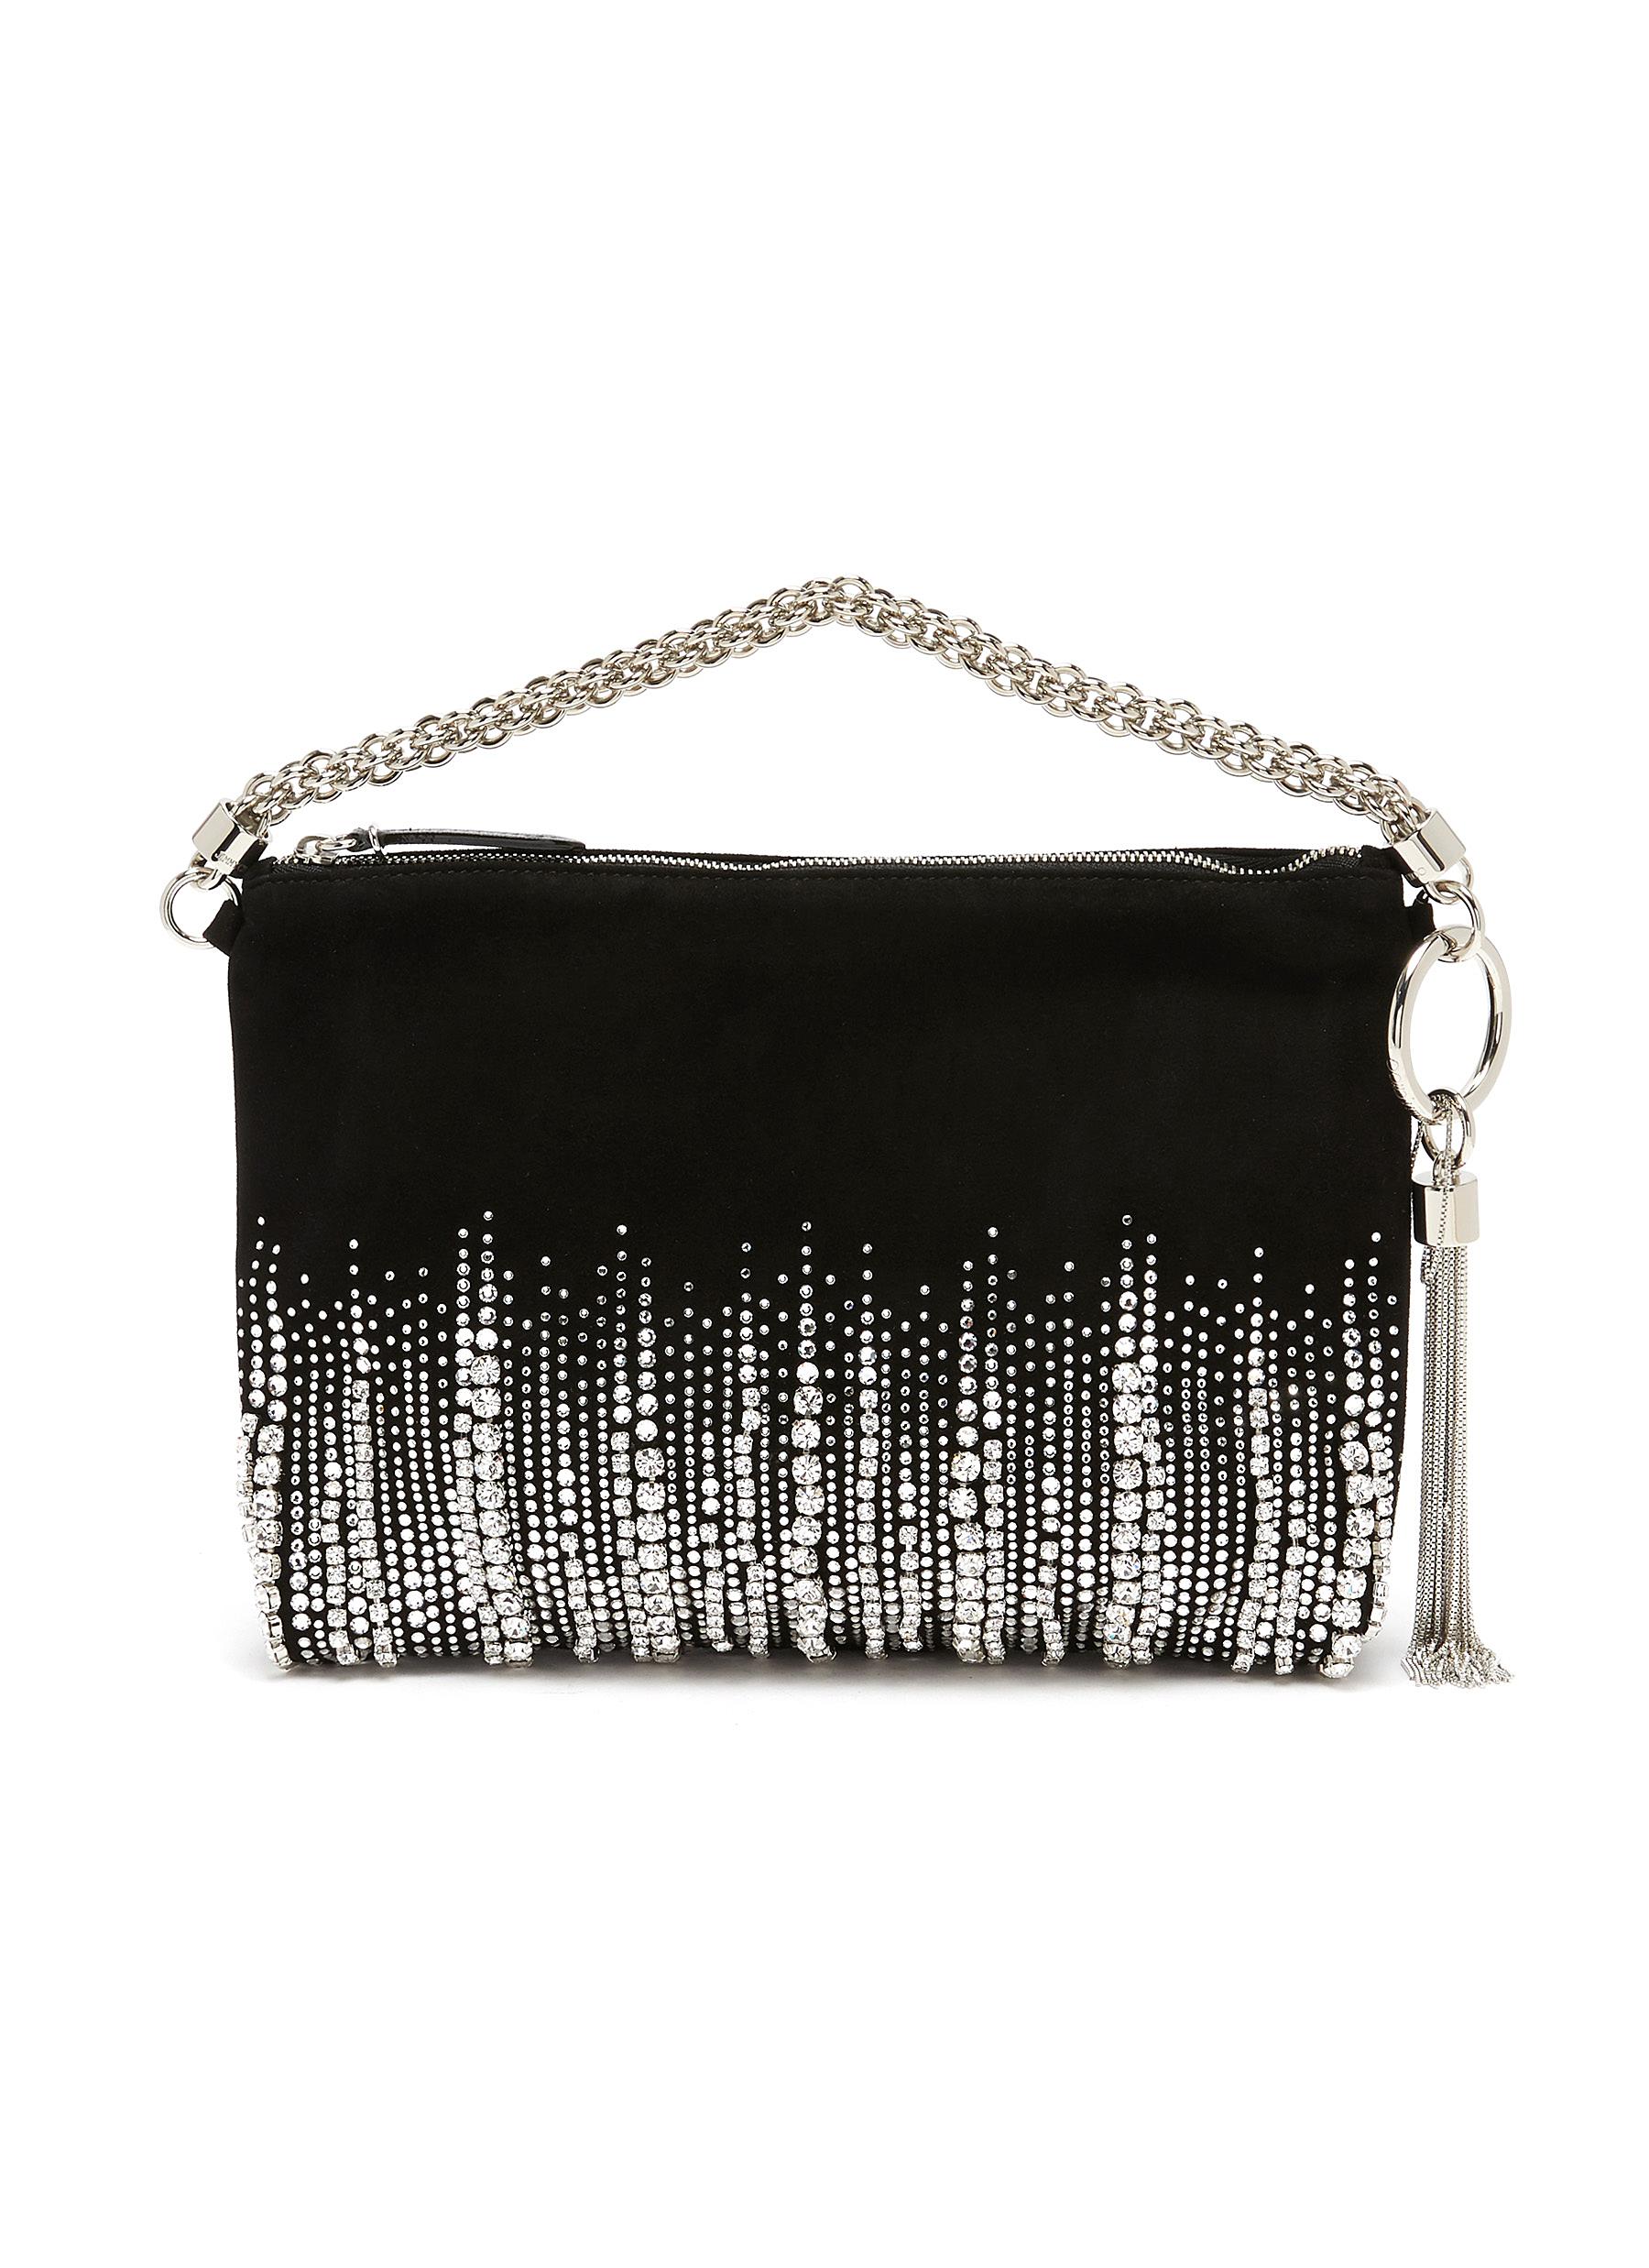 JIMMY CHOO 'CALLIE' EMBROIDERED CRYSTAL SUEDE CLUTCH